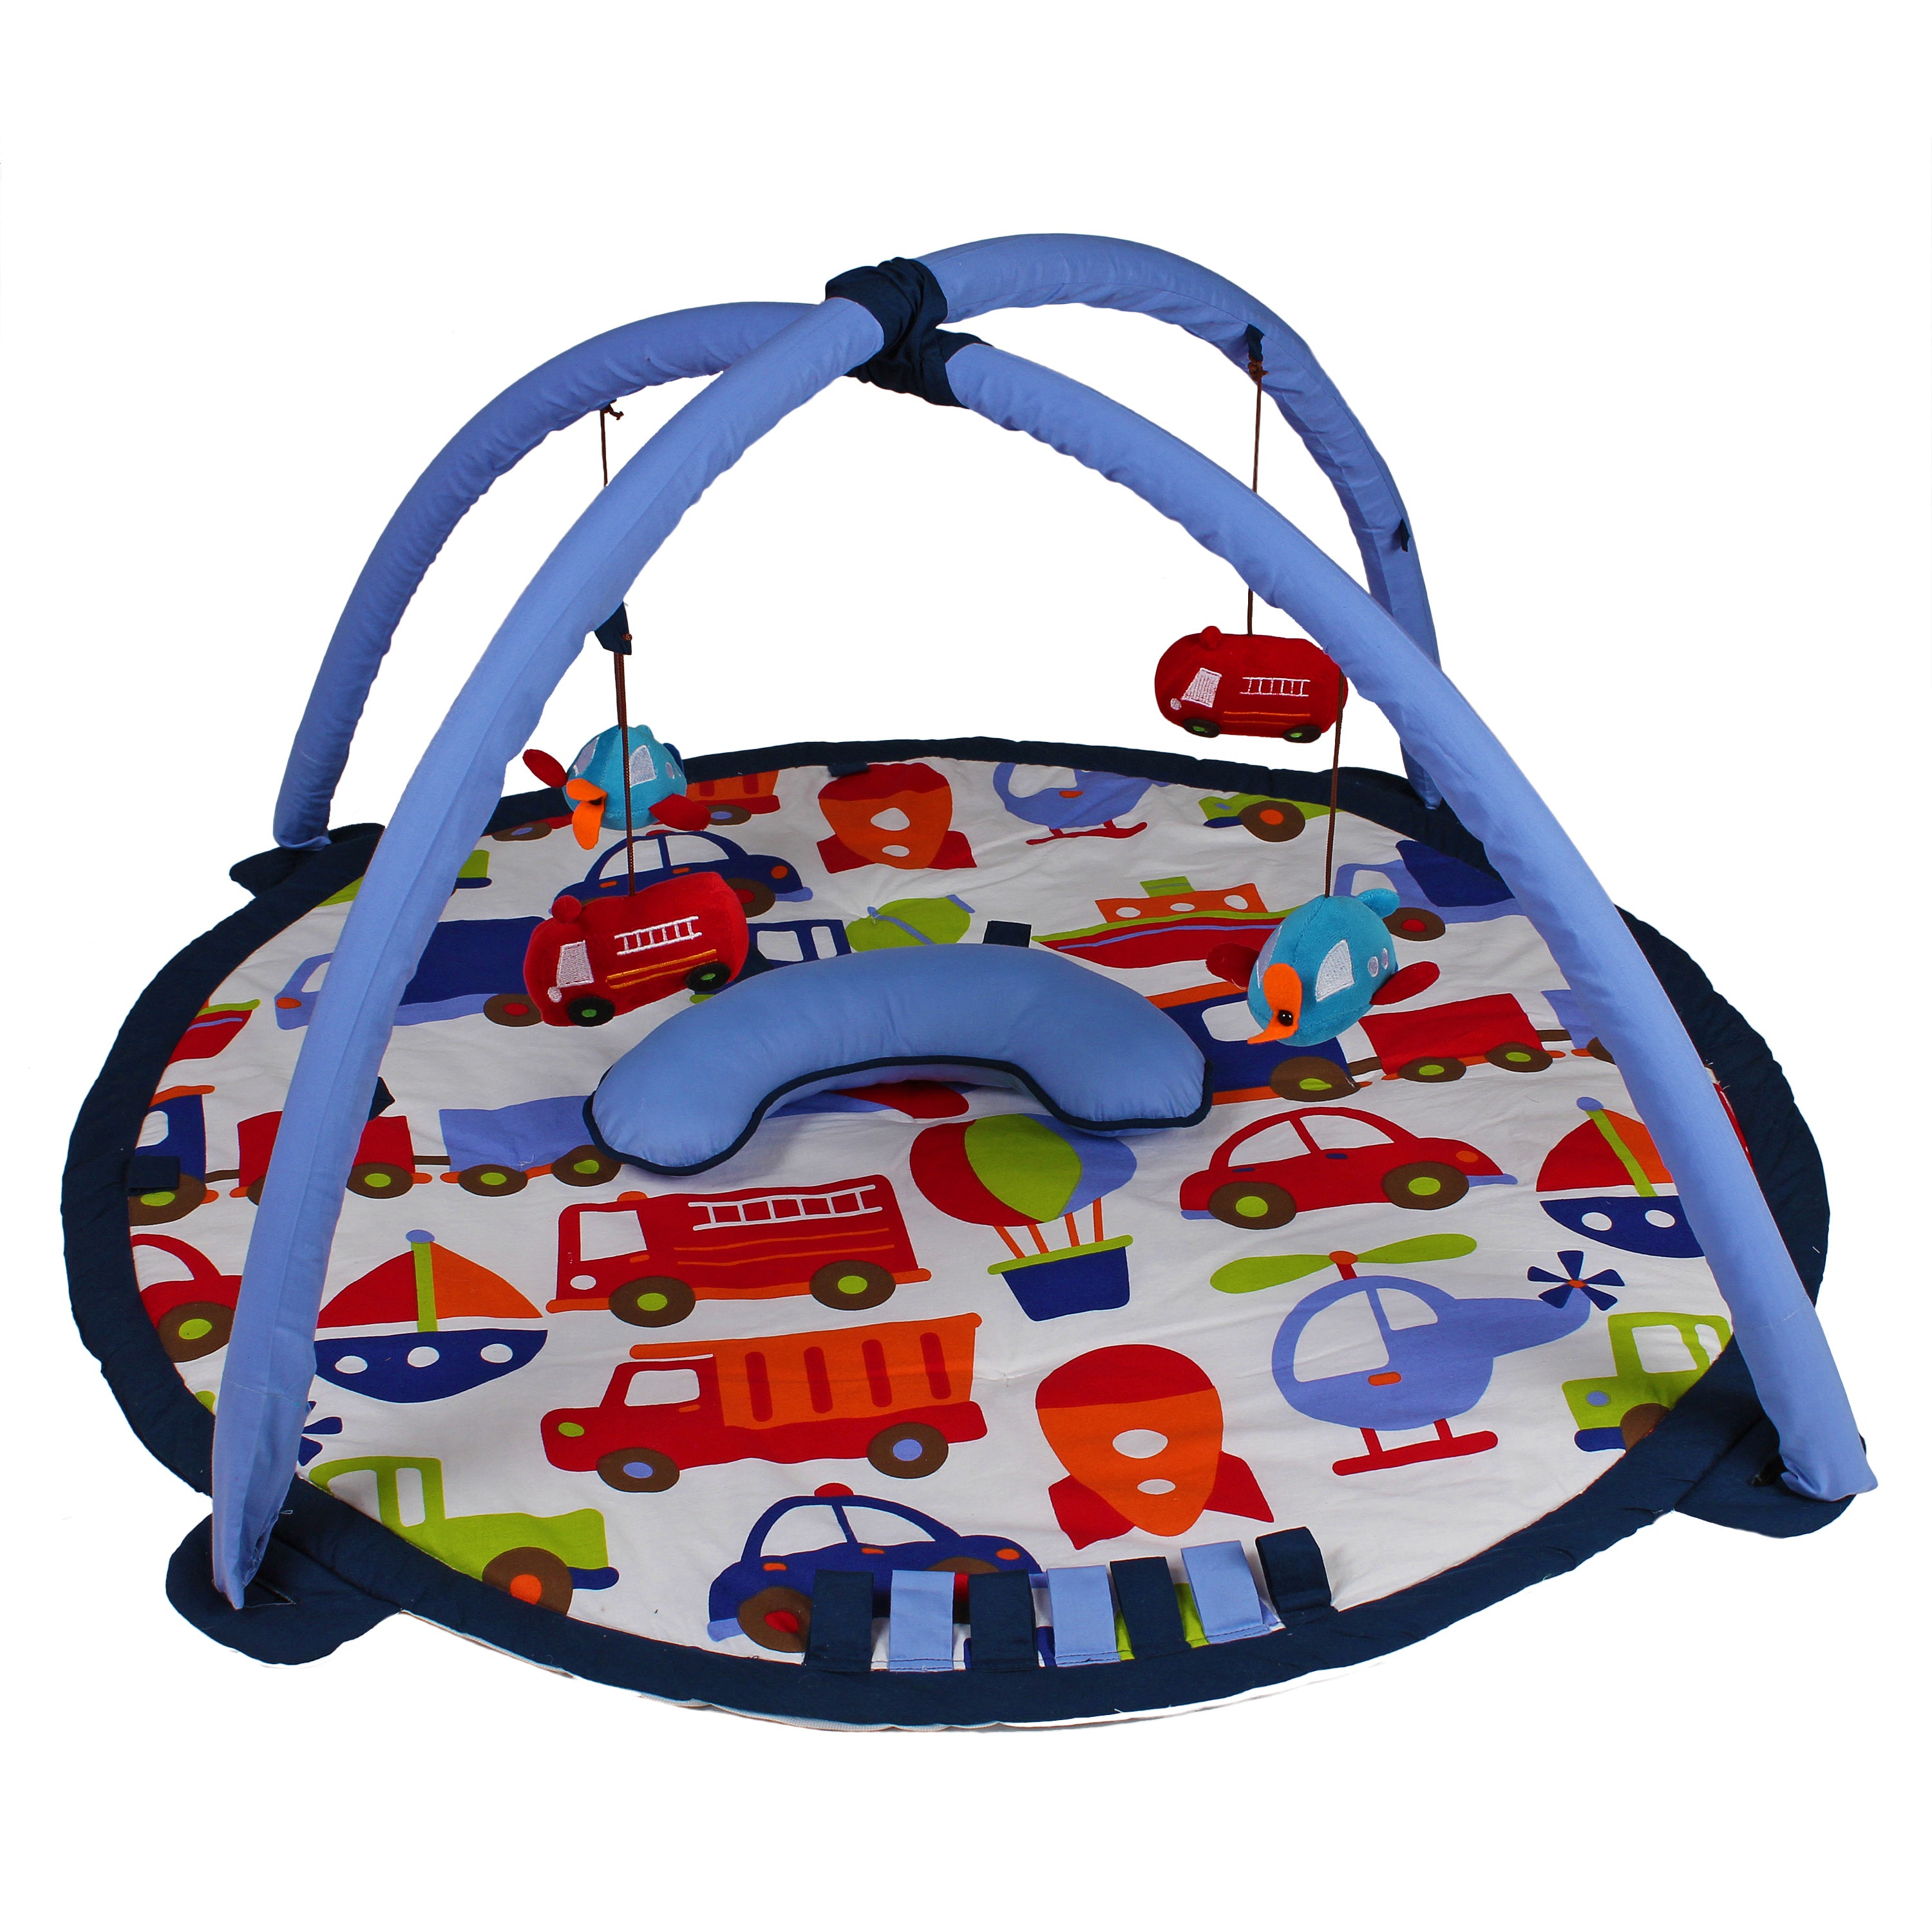 Bacati - Playmat/Baby Activity Gym with Mat, Transportation, Blue/Navy/Orange/Red/Green